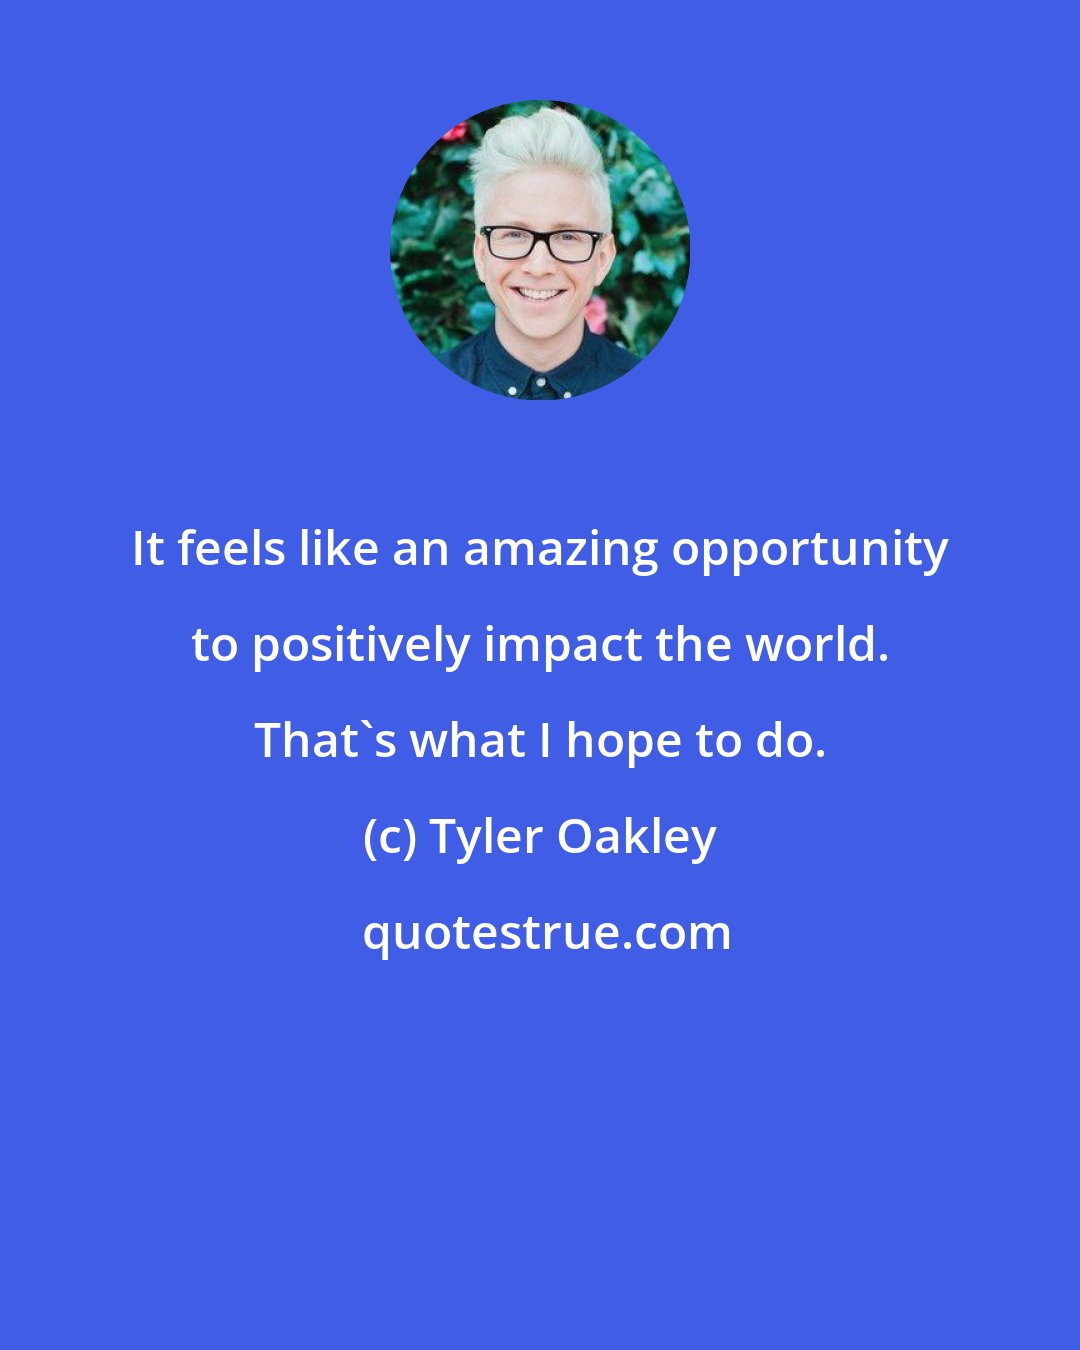 Tyler Oakley: It feels like an amazing opportunity to positively impact the world. That's what I hope to do.